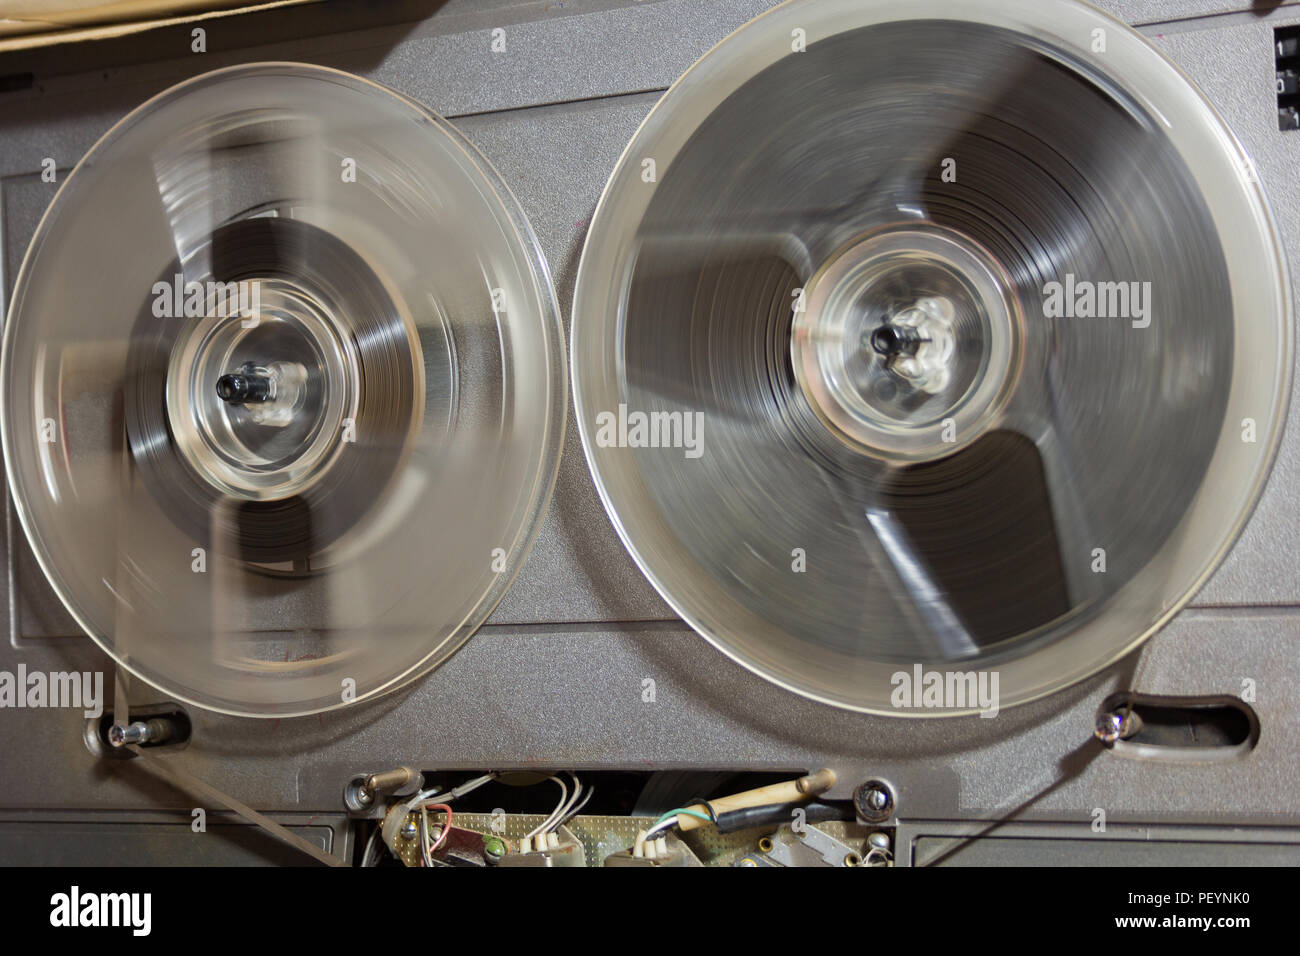 Old reel-to-reel recorder with magnetic tape on it Stock Photo - Alamy